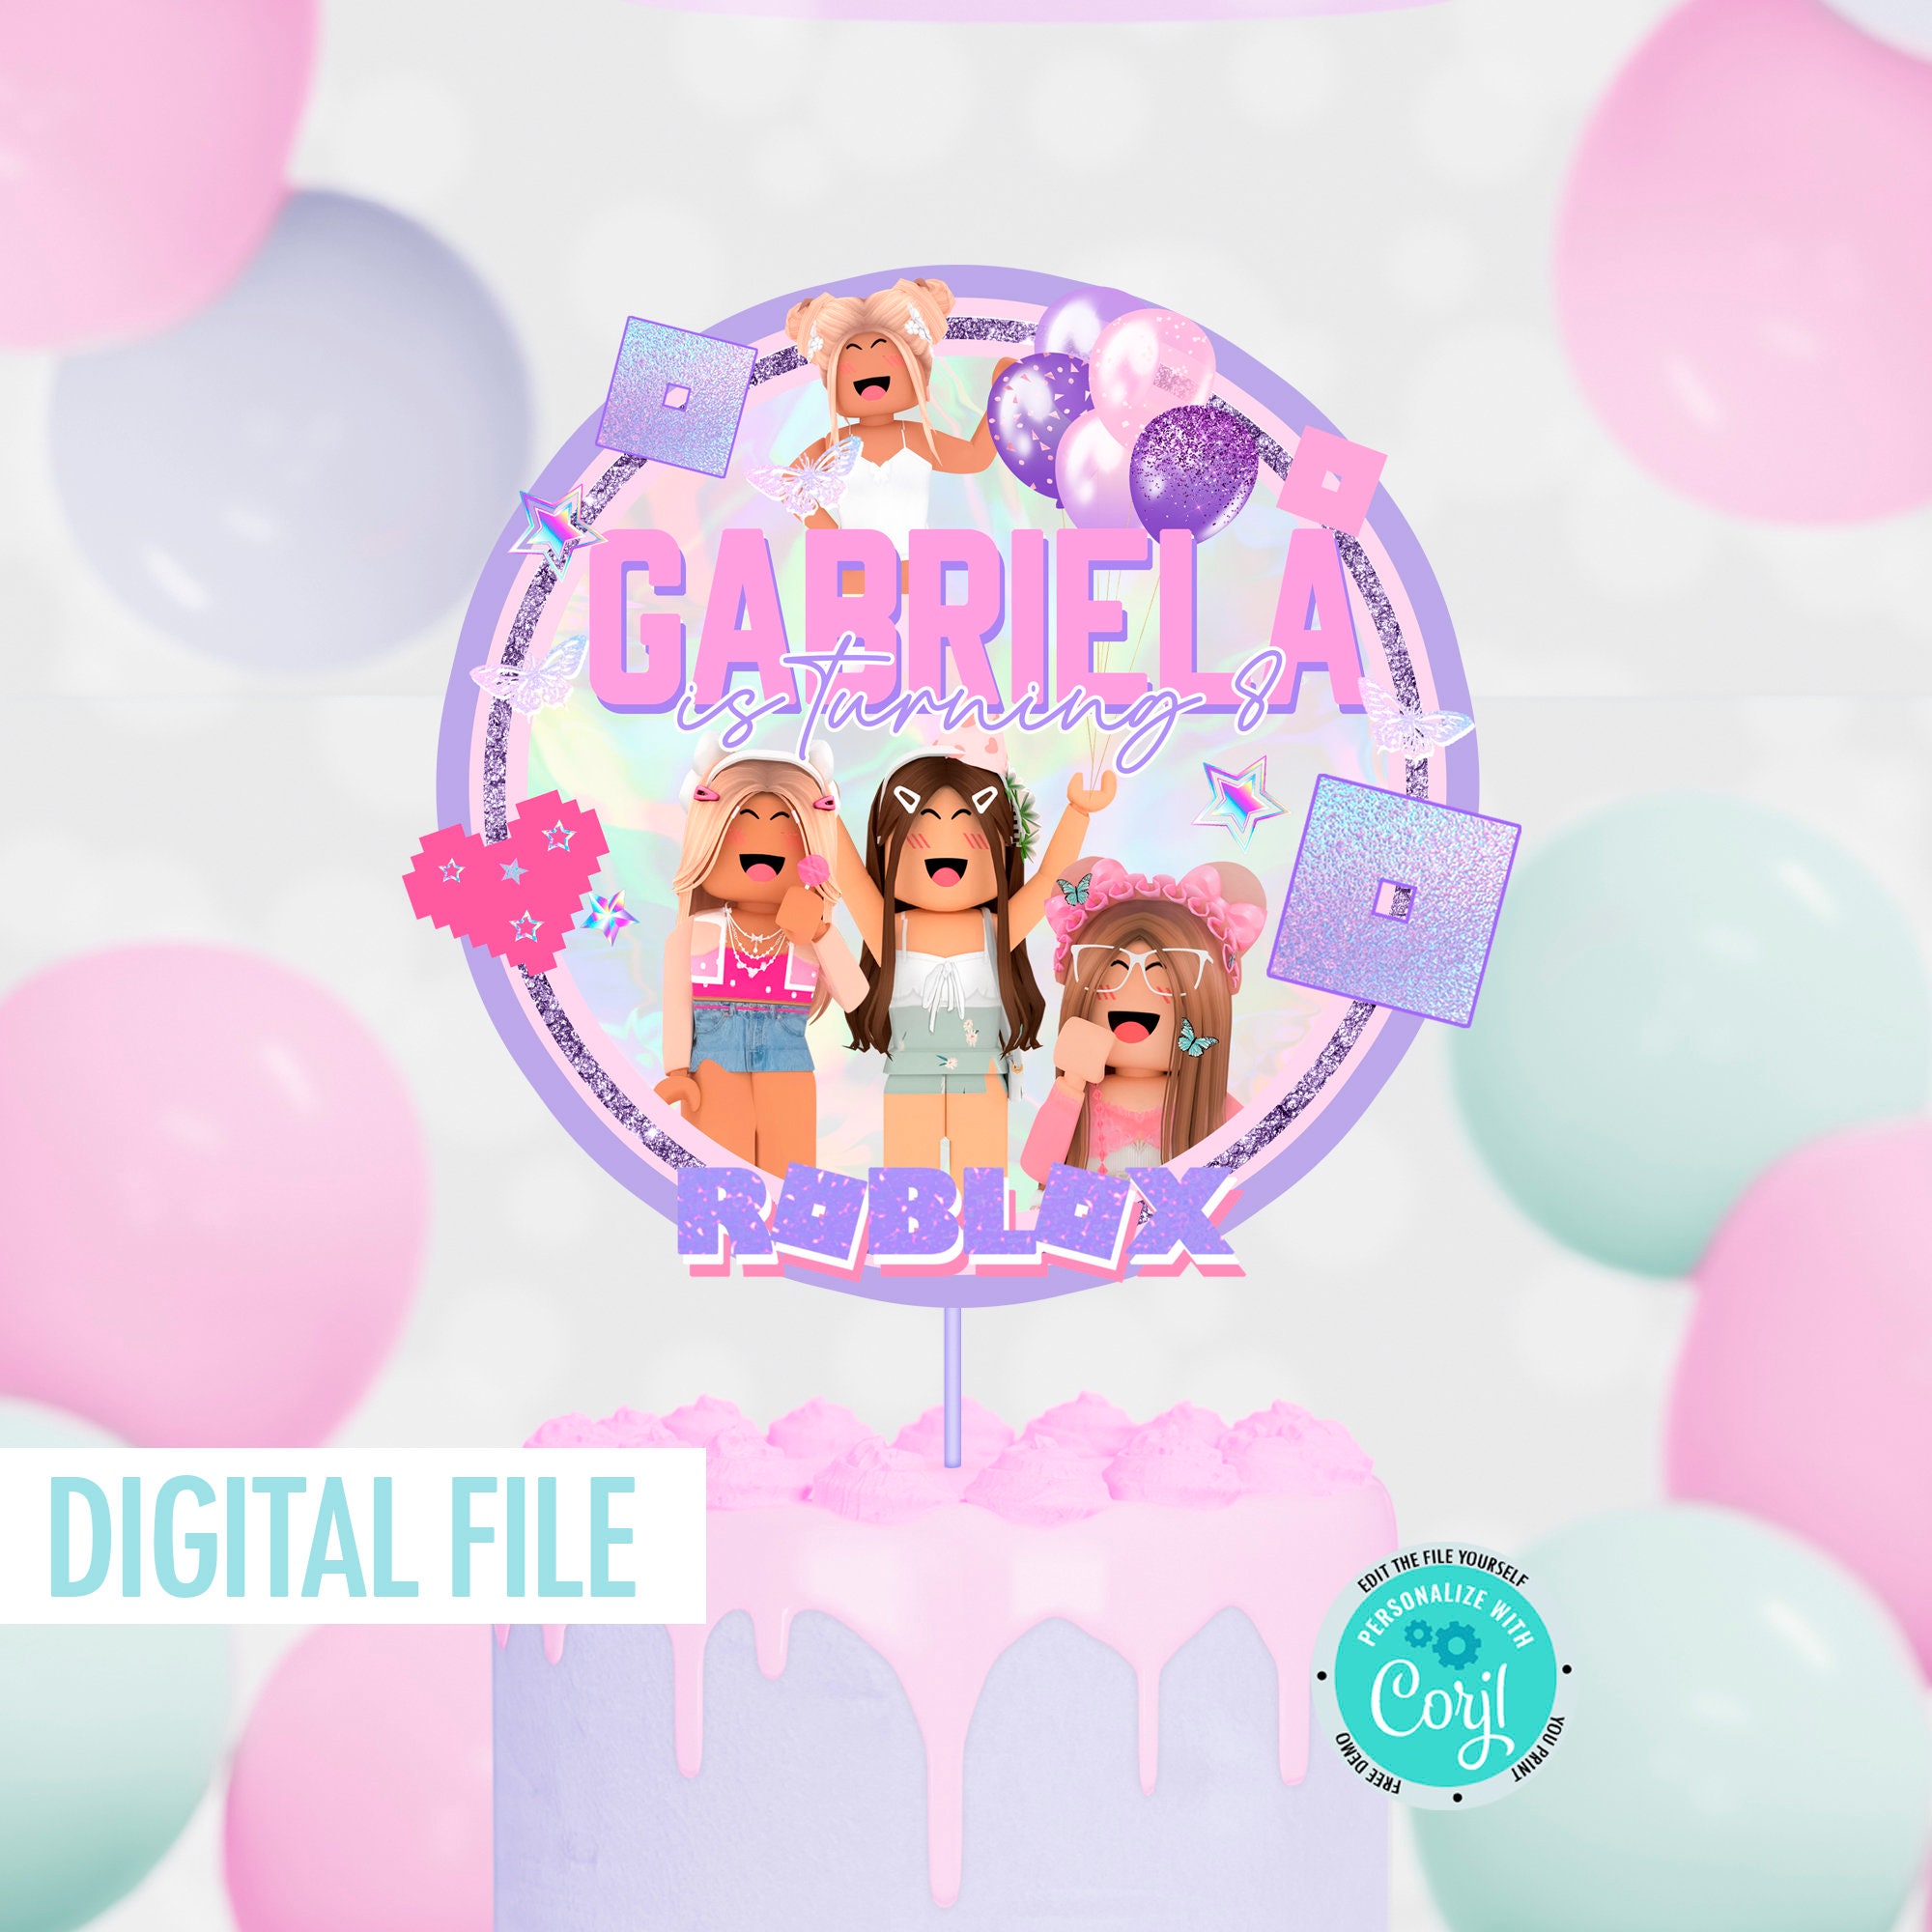 Girls Roblox Birthdayparty Girl Roblox Zoom Party Background